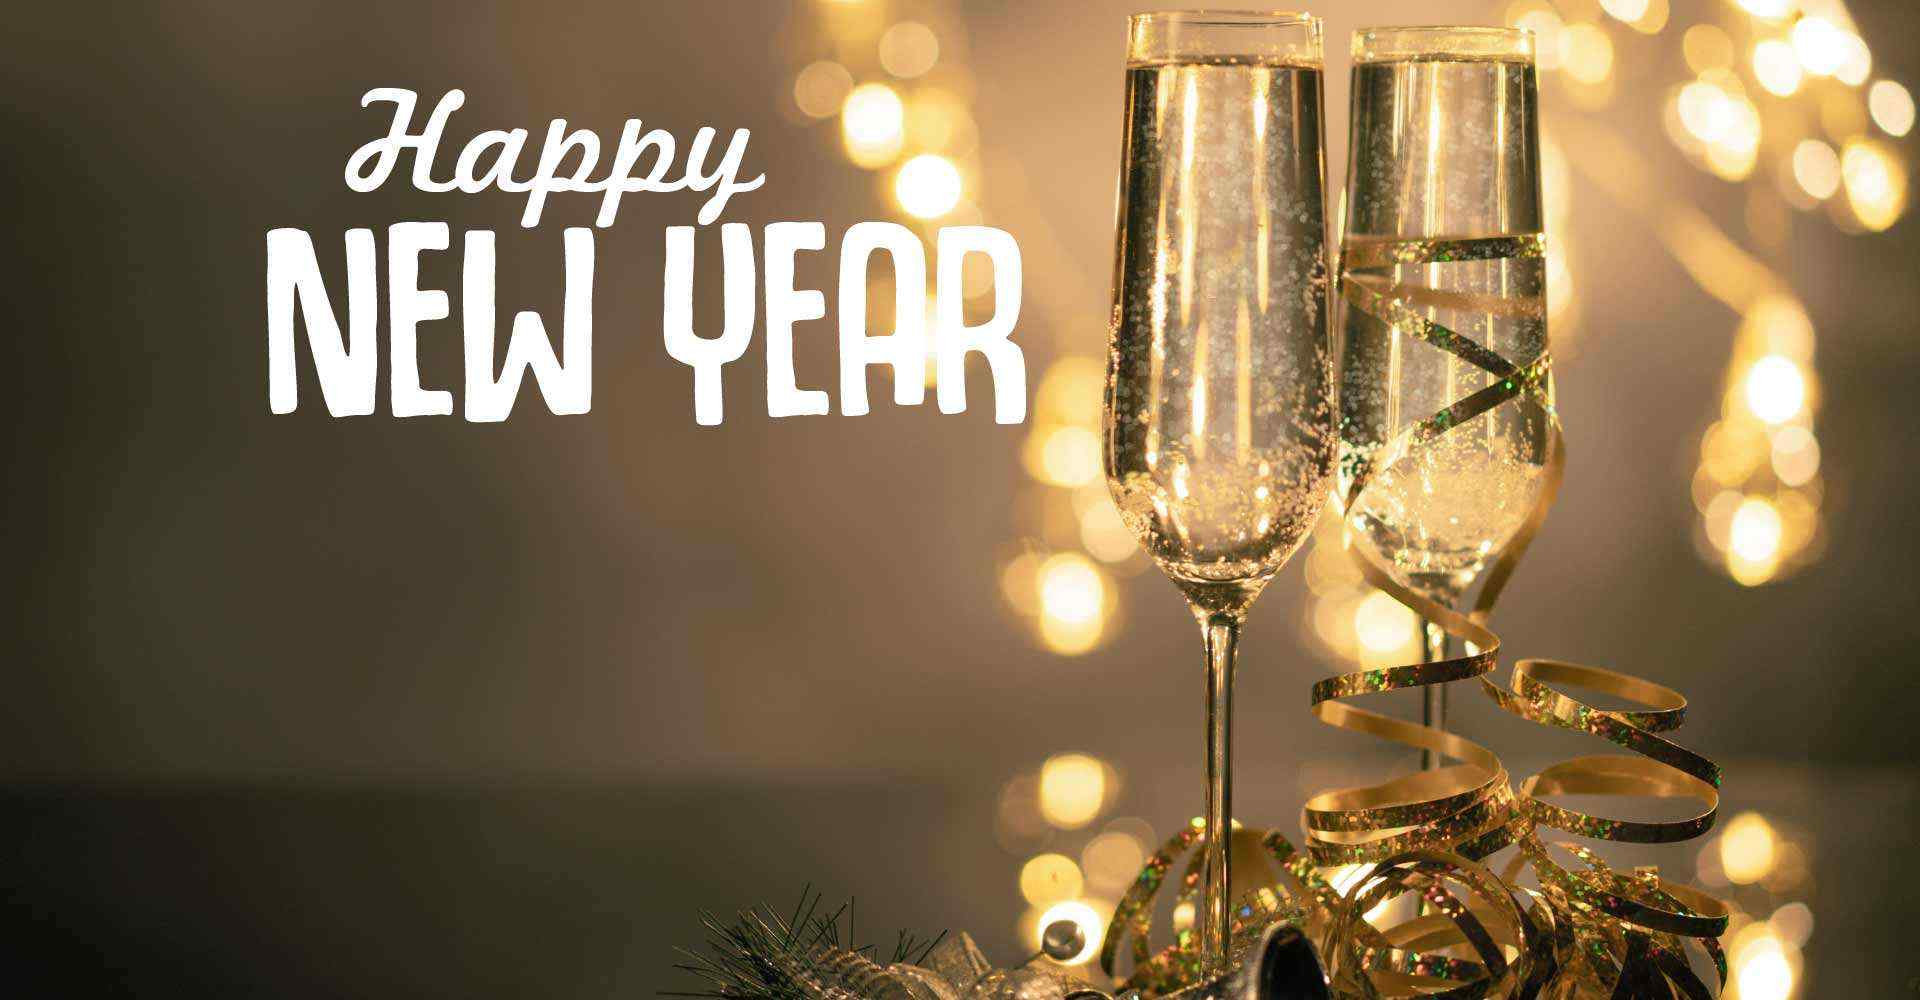 Two glasses of sparkling wine and a Happy New Year wish from Centratel